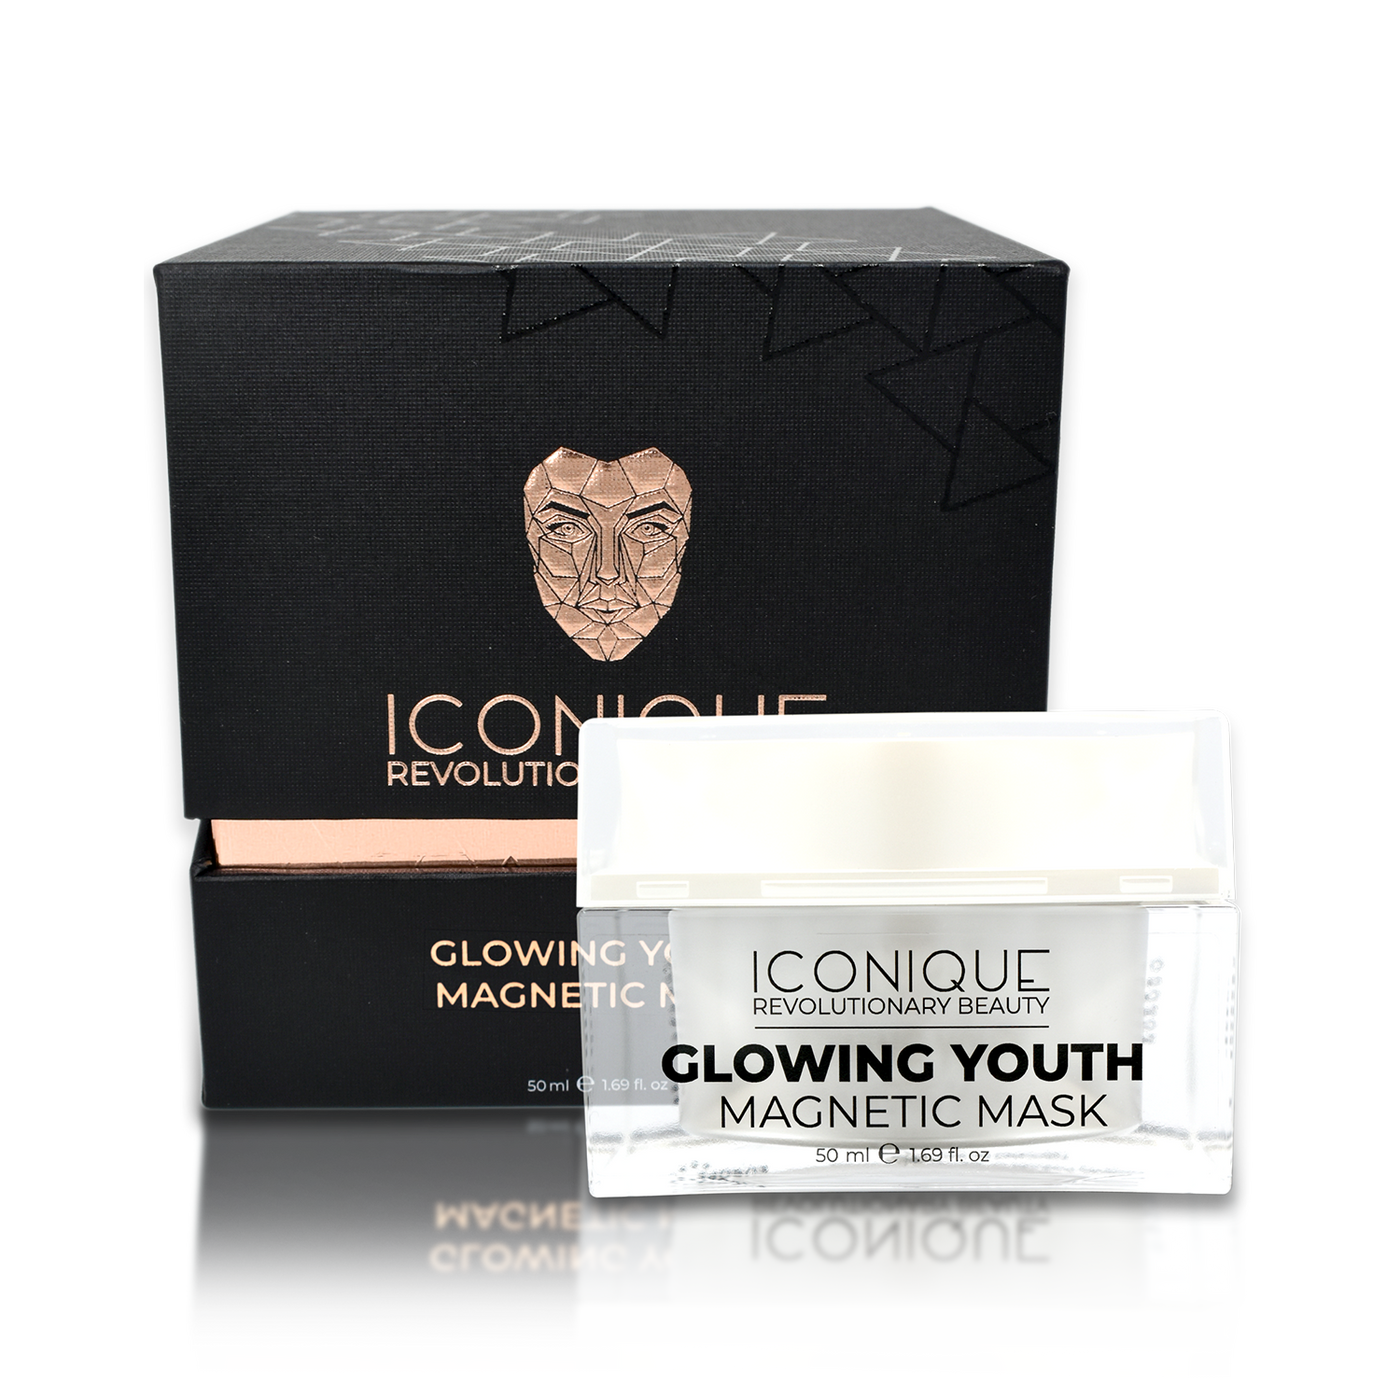 Glowing Youth Magnetic Mask